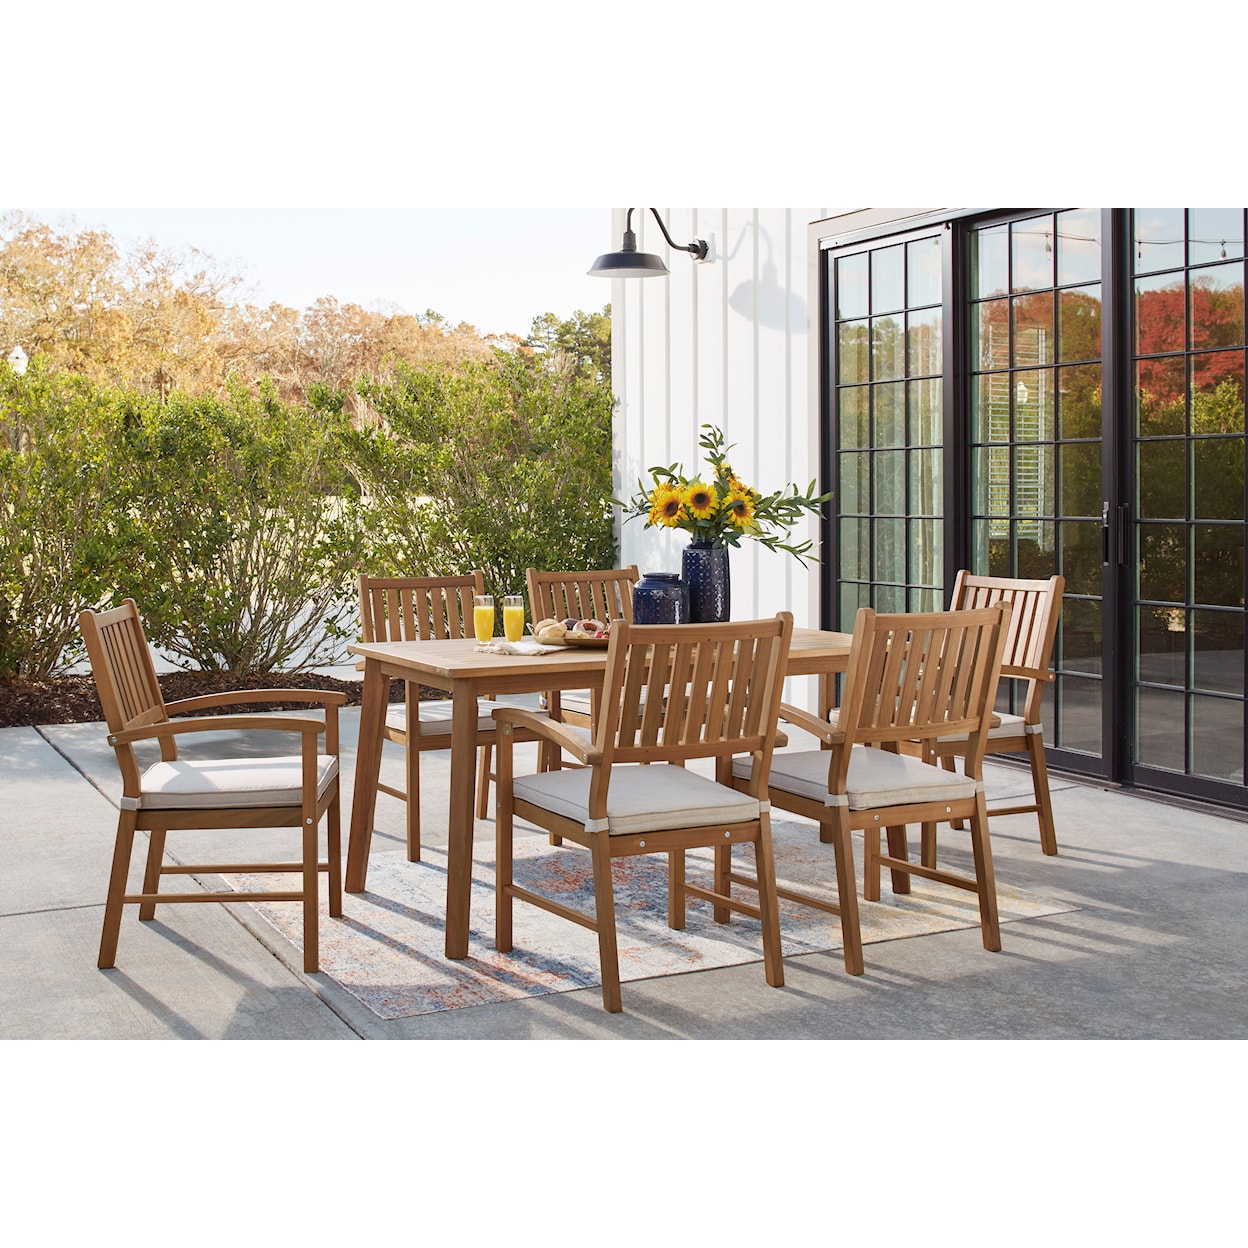 Signature Design by Ashley Janiyah Outdoor Dining Table w/ 6 Chairs